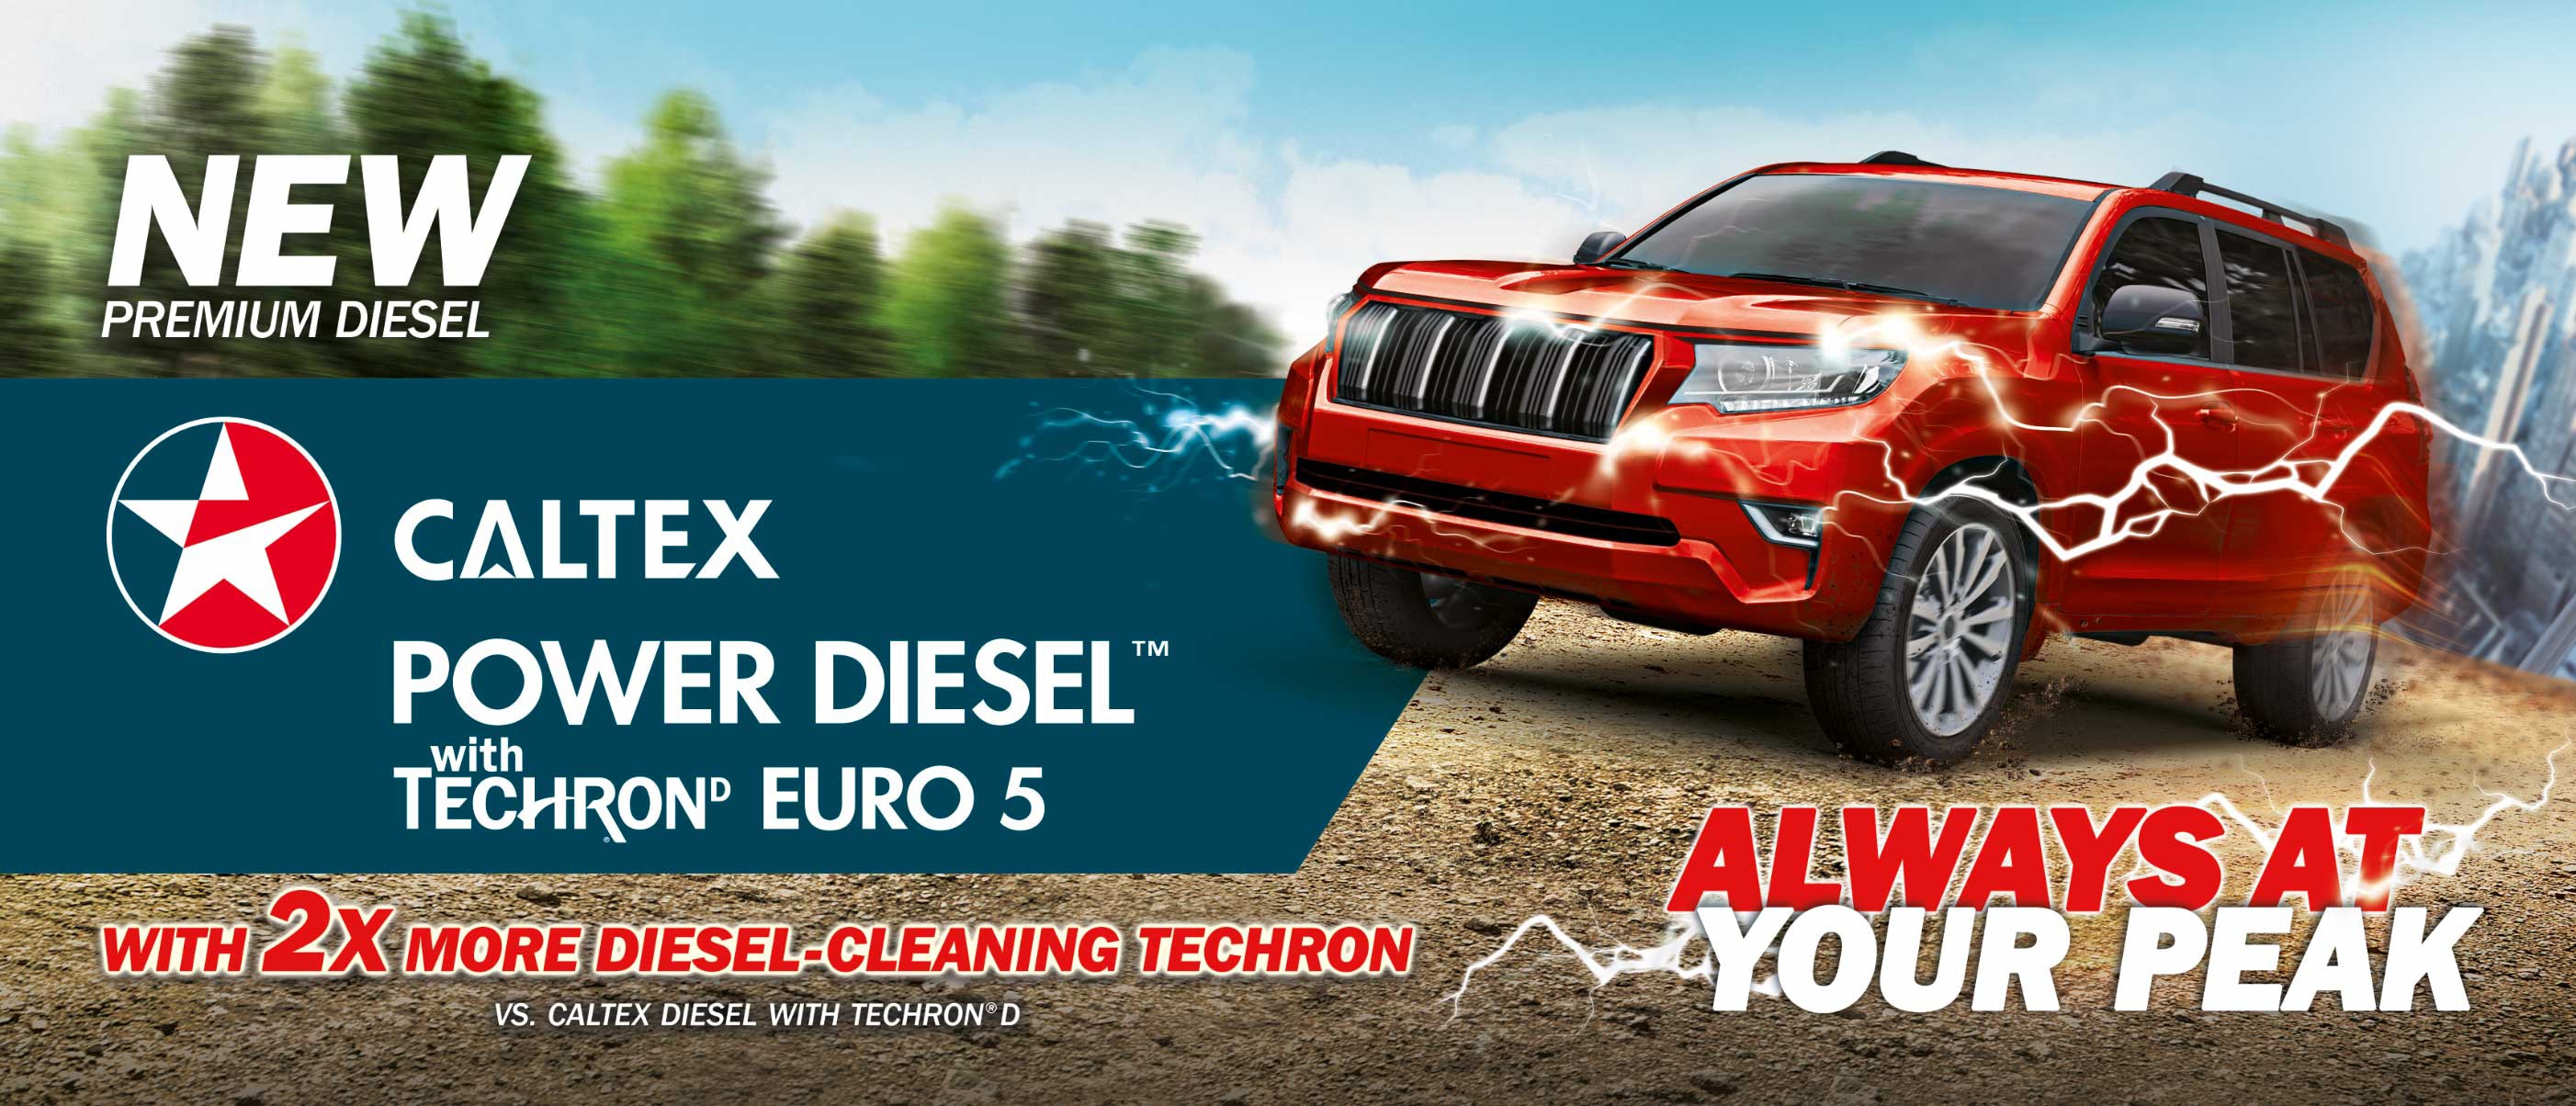 Keep your vehicle at its peak with the new Caltex Power Diesel™ Techron®D Euro 5. Photo source: Caltex